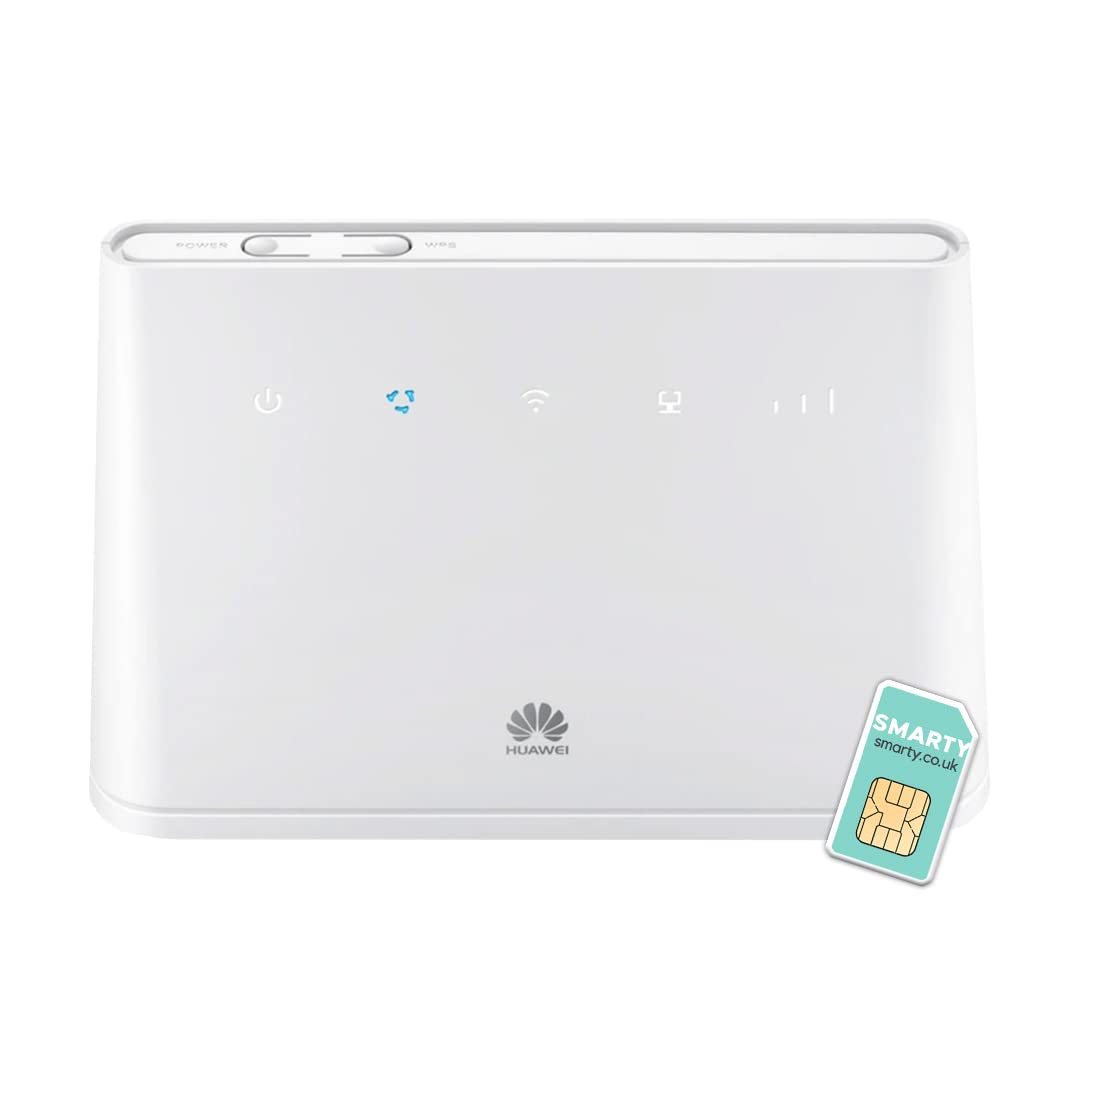 Huawei B311 2020, CAT 4, 4G/ LTE 150 Mbps Mobile Wi-Fi Router, Unlocked to All Networks- Genuine UK Warranty STOCK (Non Network Logo) with FREE SMARTY SIM Card- White B311-221